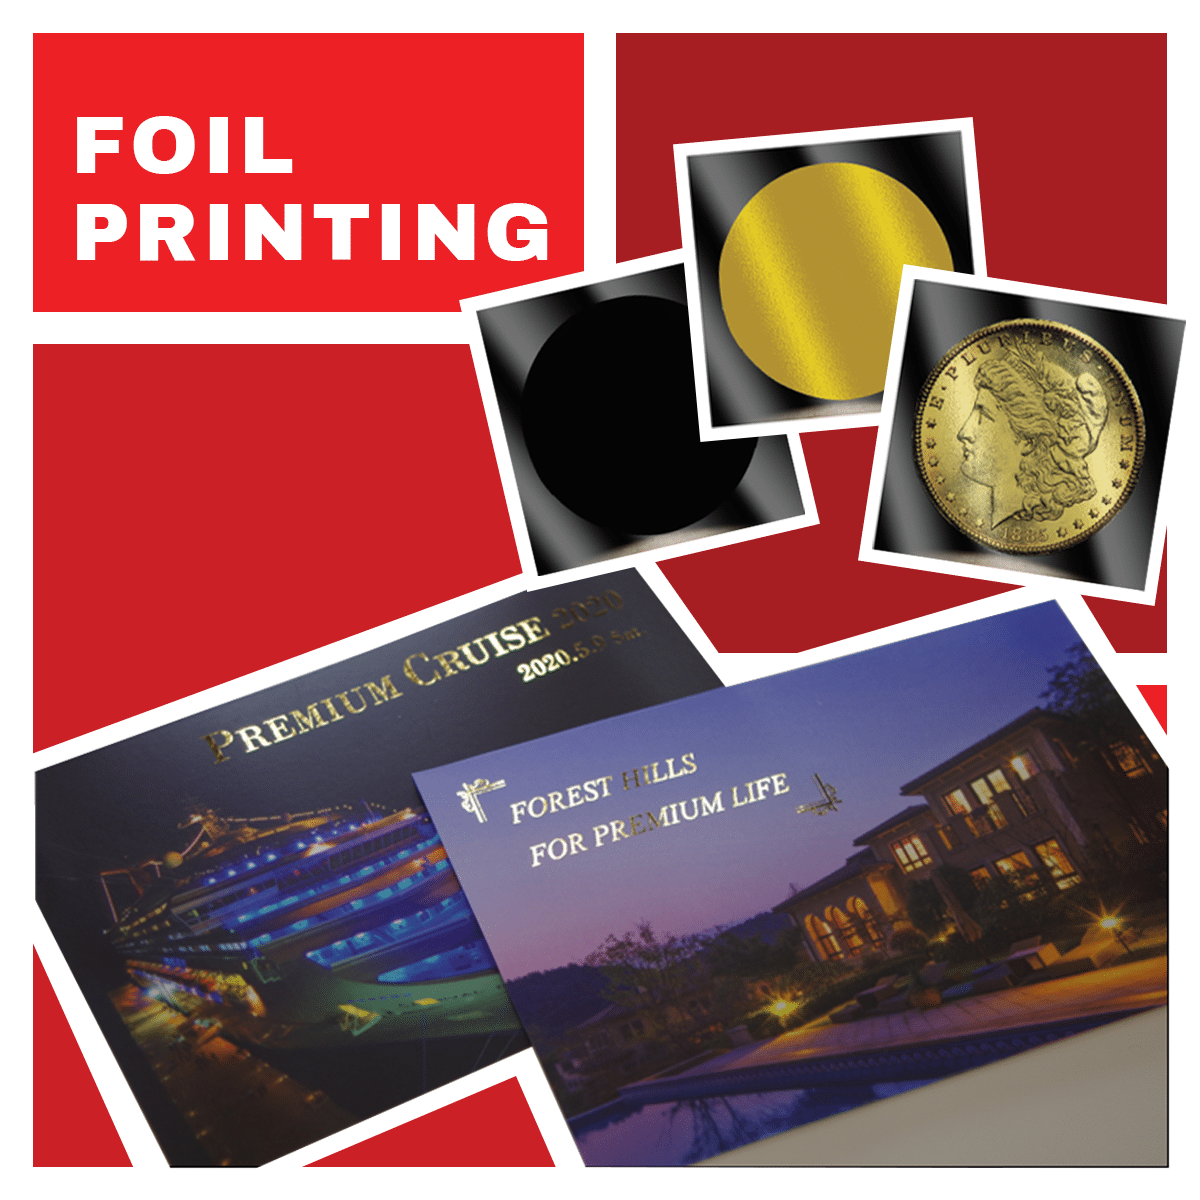 Production_Foil Printing